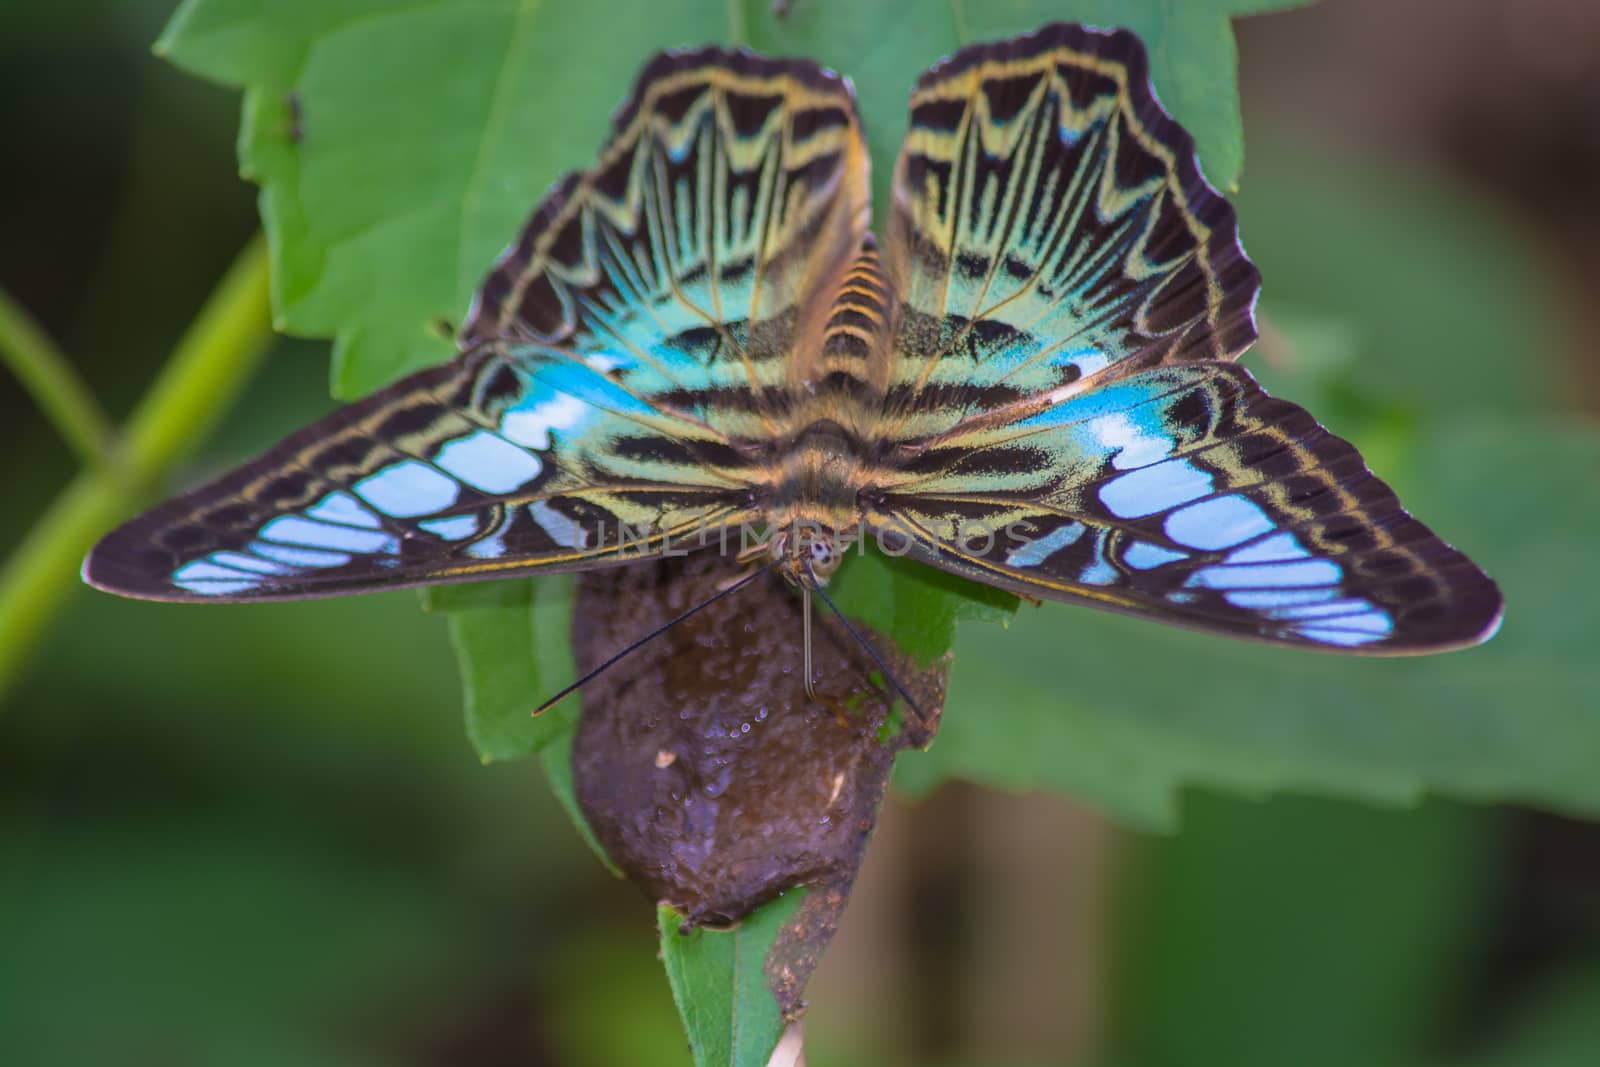 Clipper butterfly, parthenos sylvia on green leave feeding on bird dropping.